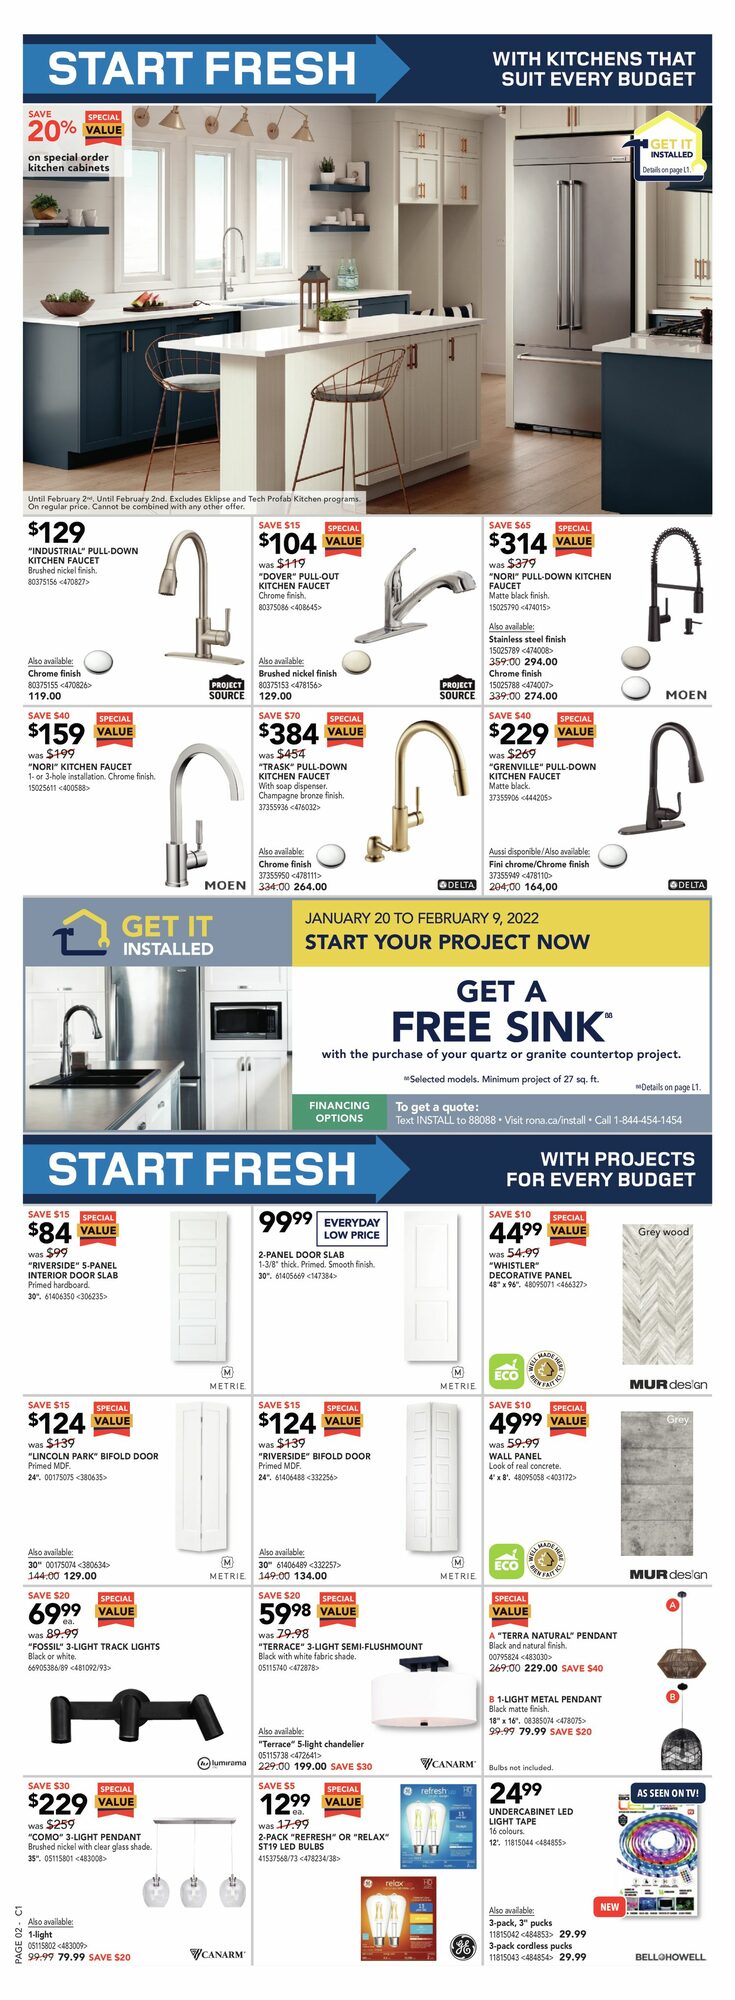 Rona - Weekly Flyer Specials - Page 3